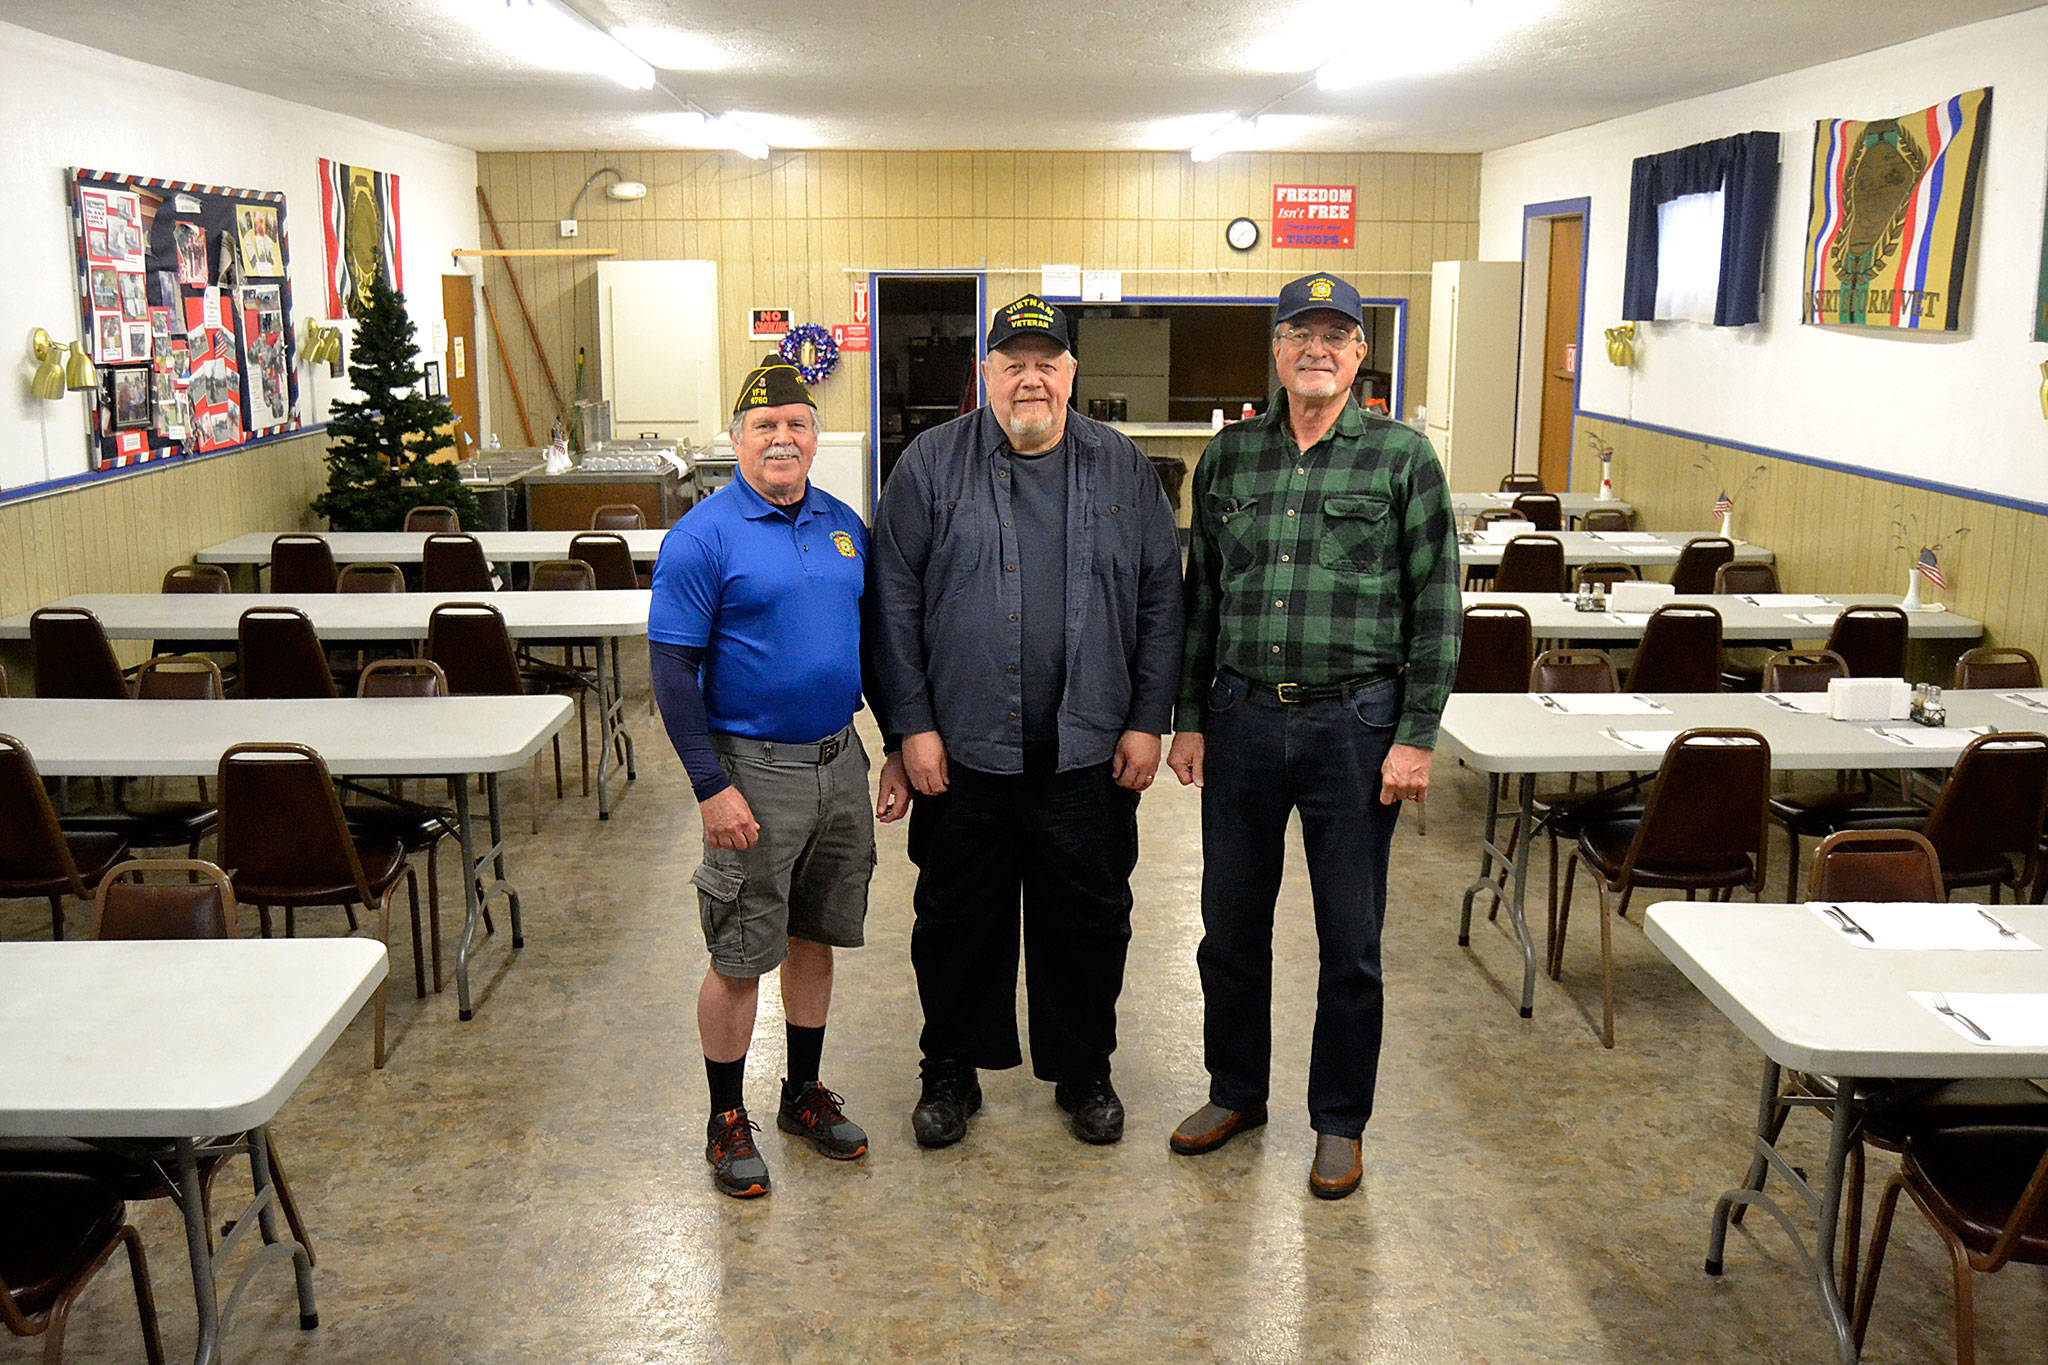 Leaders of the Sequim VFW Post 4760, from left, Post Commander Kevin O’Neill, Quartermaster Steve Henrikson, and Past-Commander Neil Gamroth, stand in the post’s hall and kitchen area where they’ll continue to host breakfasts, meetings and other events. The post sold its building this summer but continues to lease its canteen/dance hall and hall/kitchen. (Matthew Nash/Olympic Peninsula News Group)